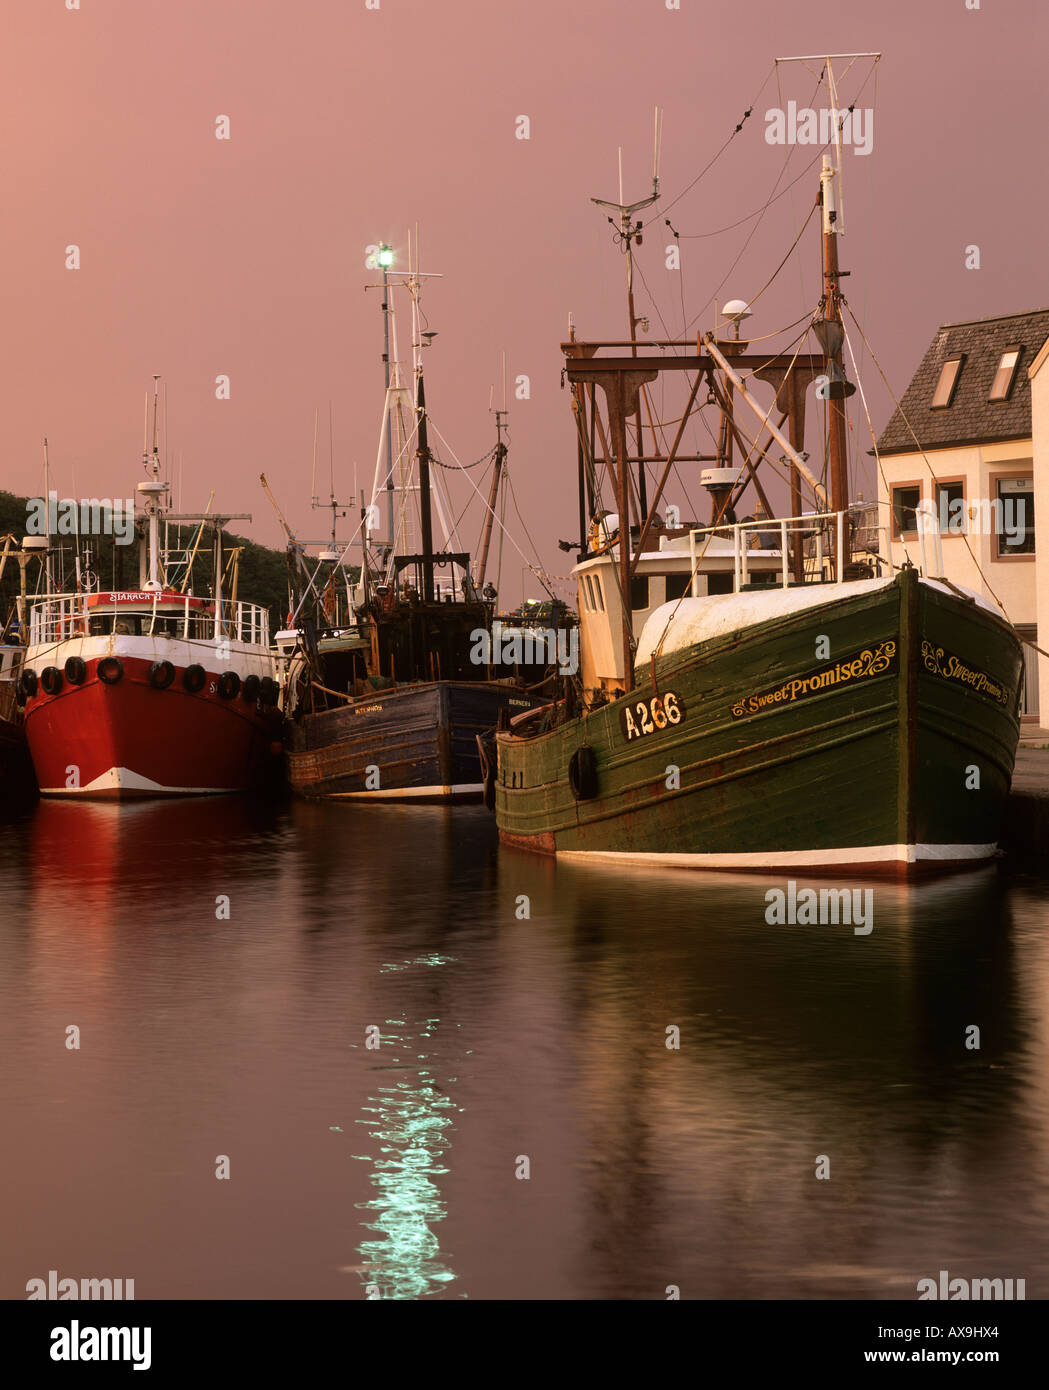 Boats in Stornoway harbour, Lewis, Outer Hebrides, Western Isles, Scotland, UK Stock Photo